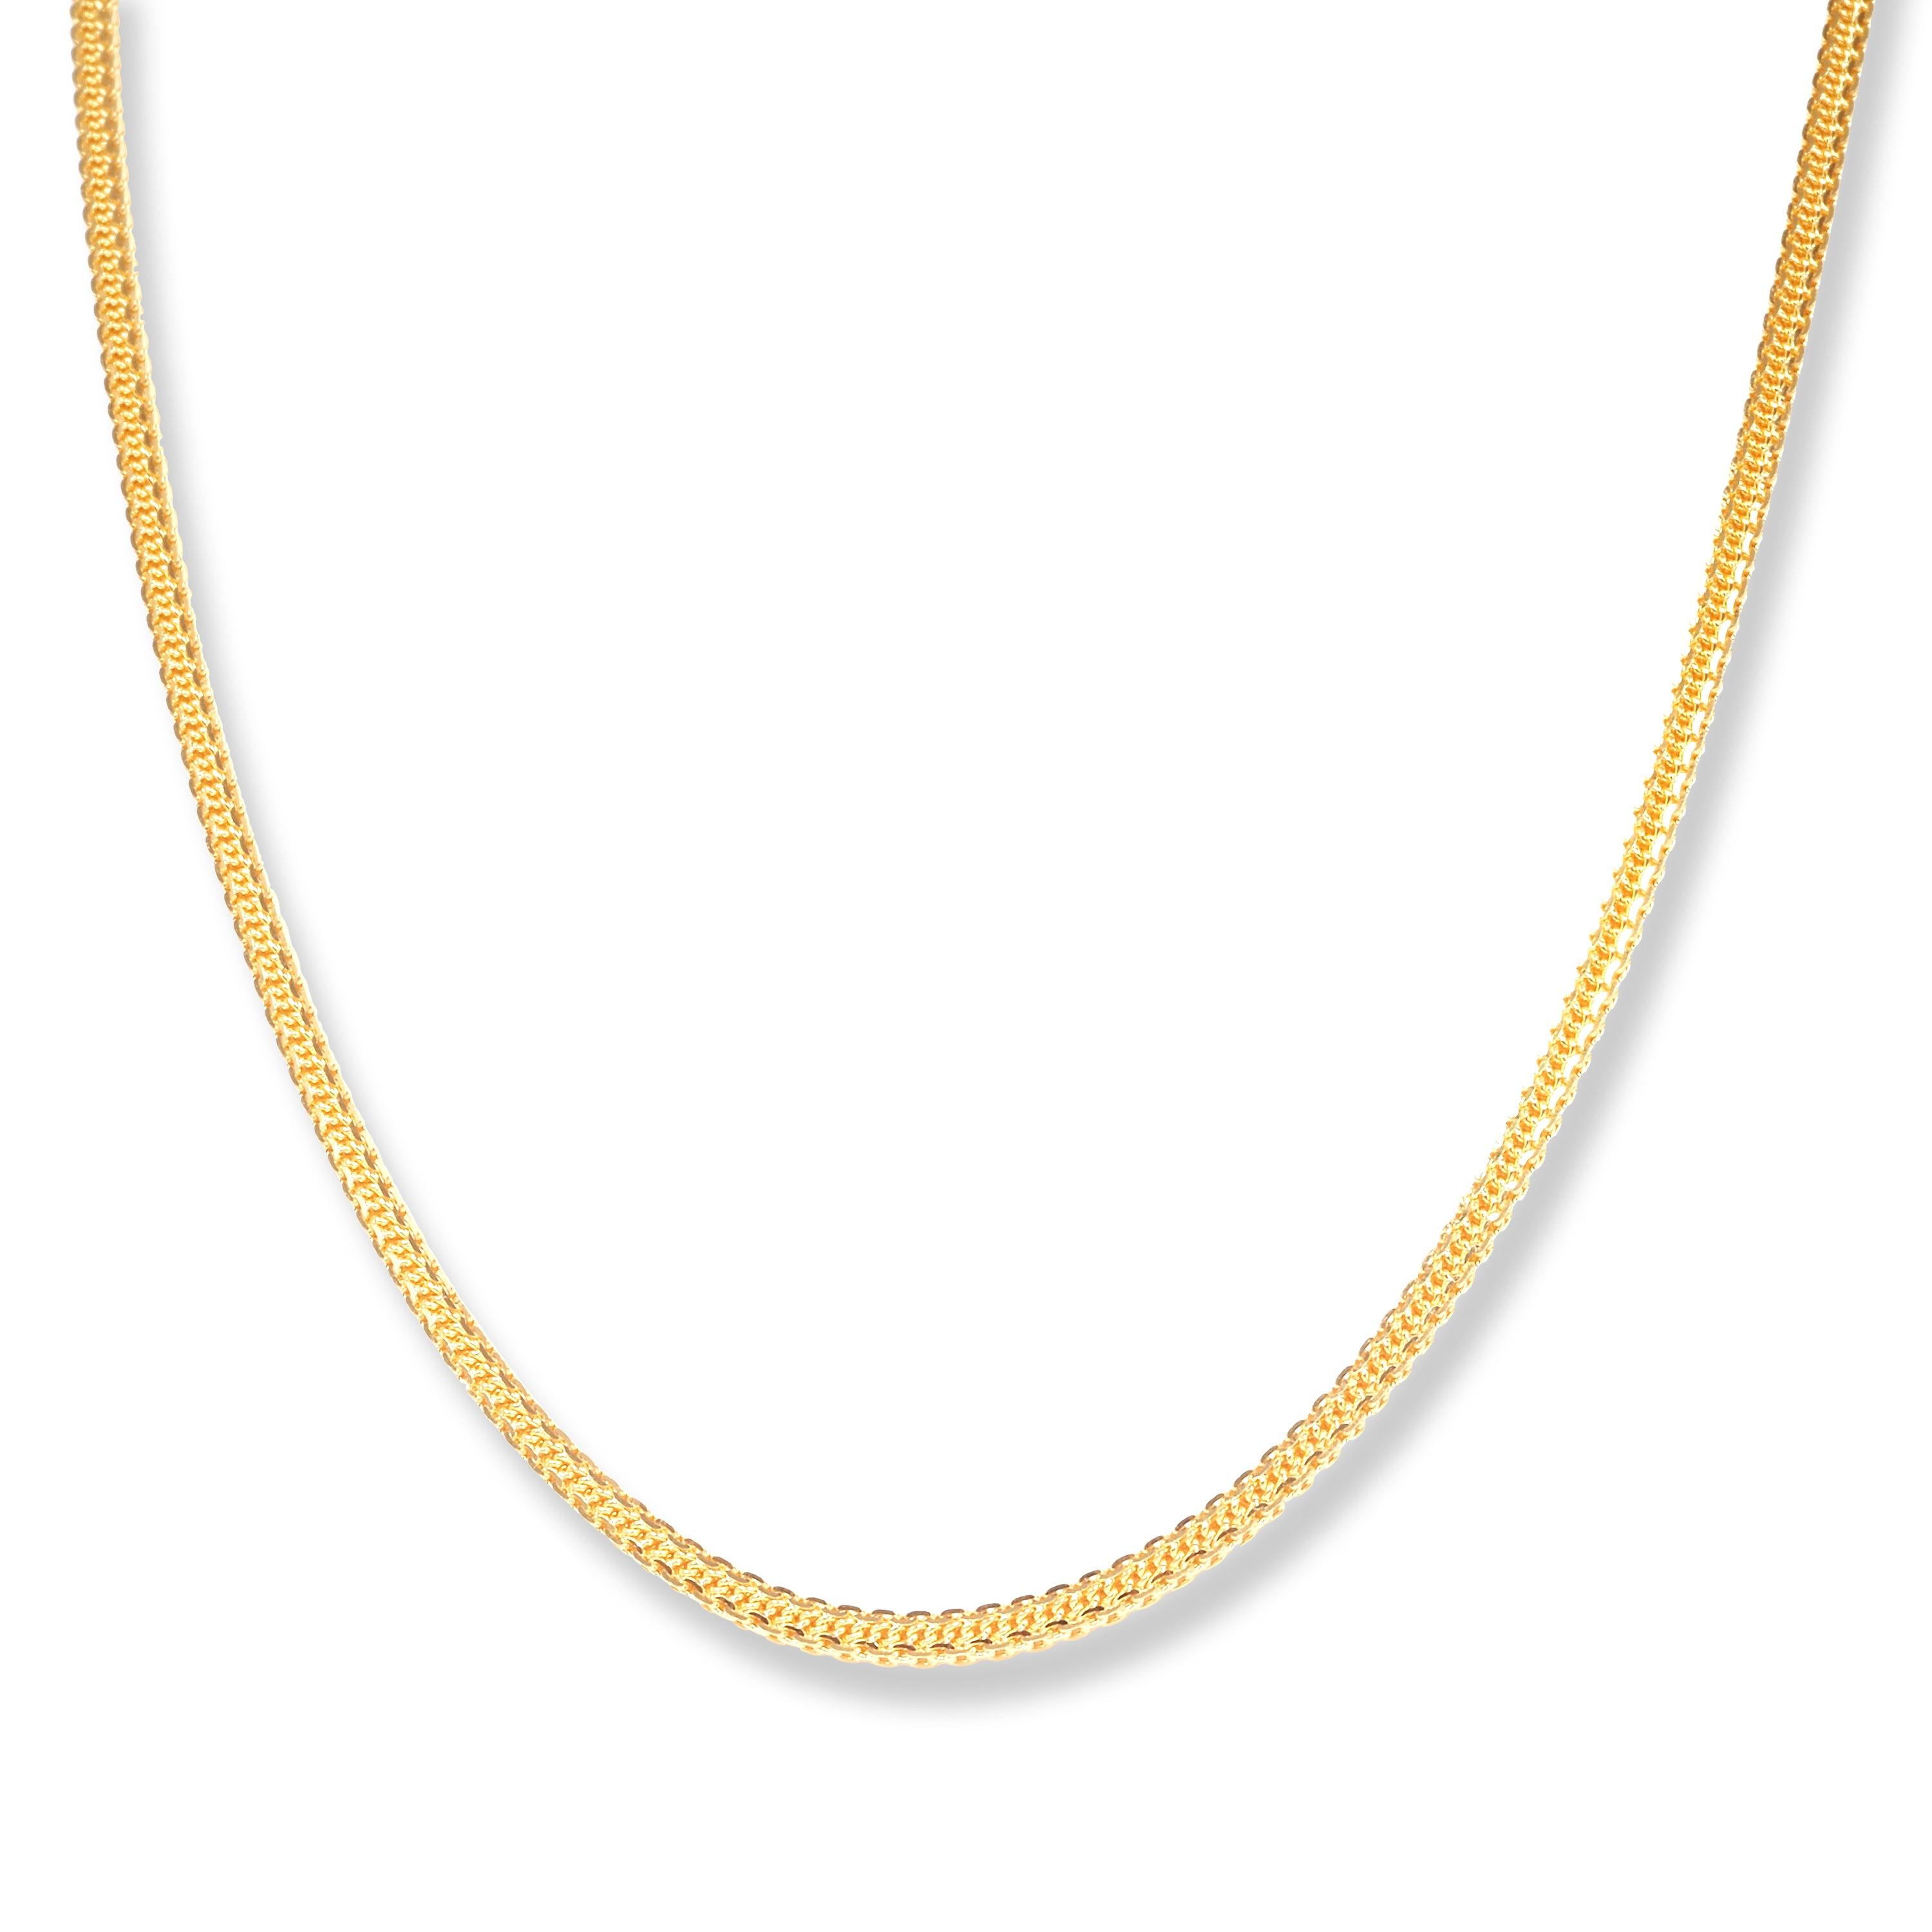 22ct Gold Fancy Dovetail Chain with Lobster Clasp C-7134 - Minar Jewellers